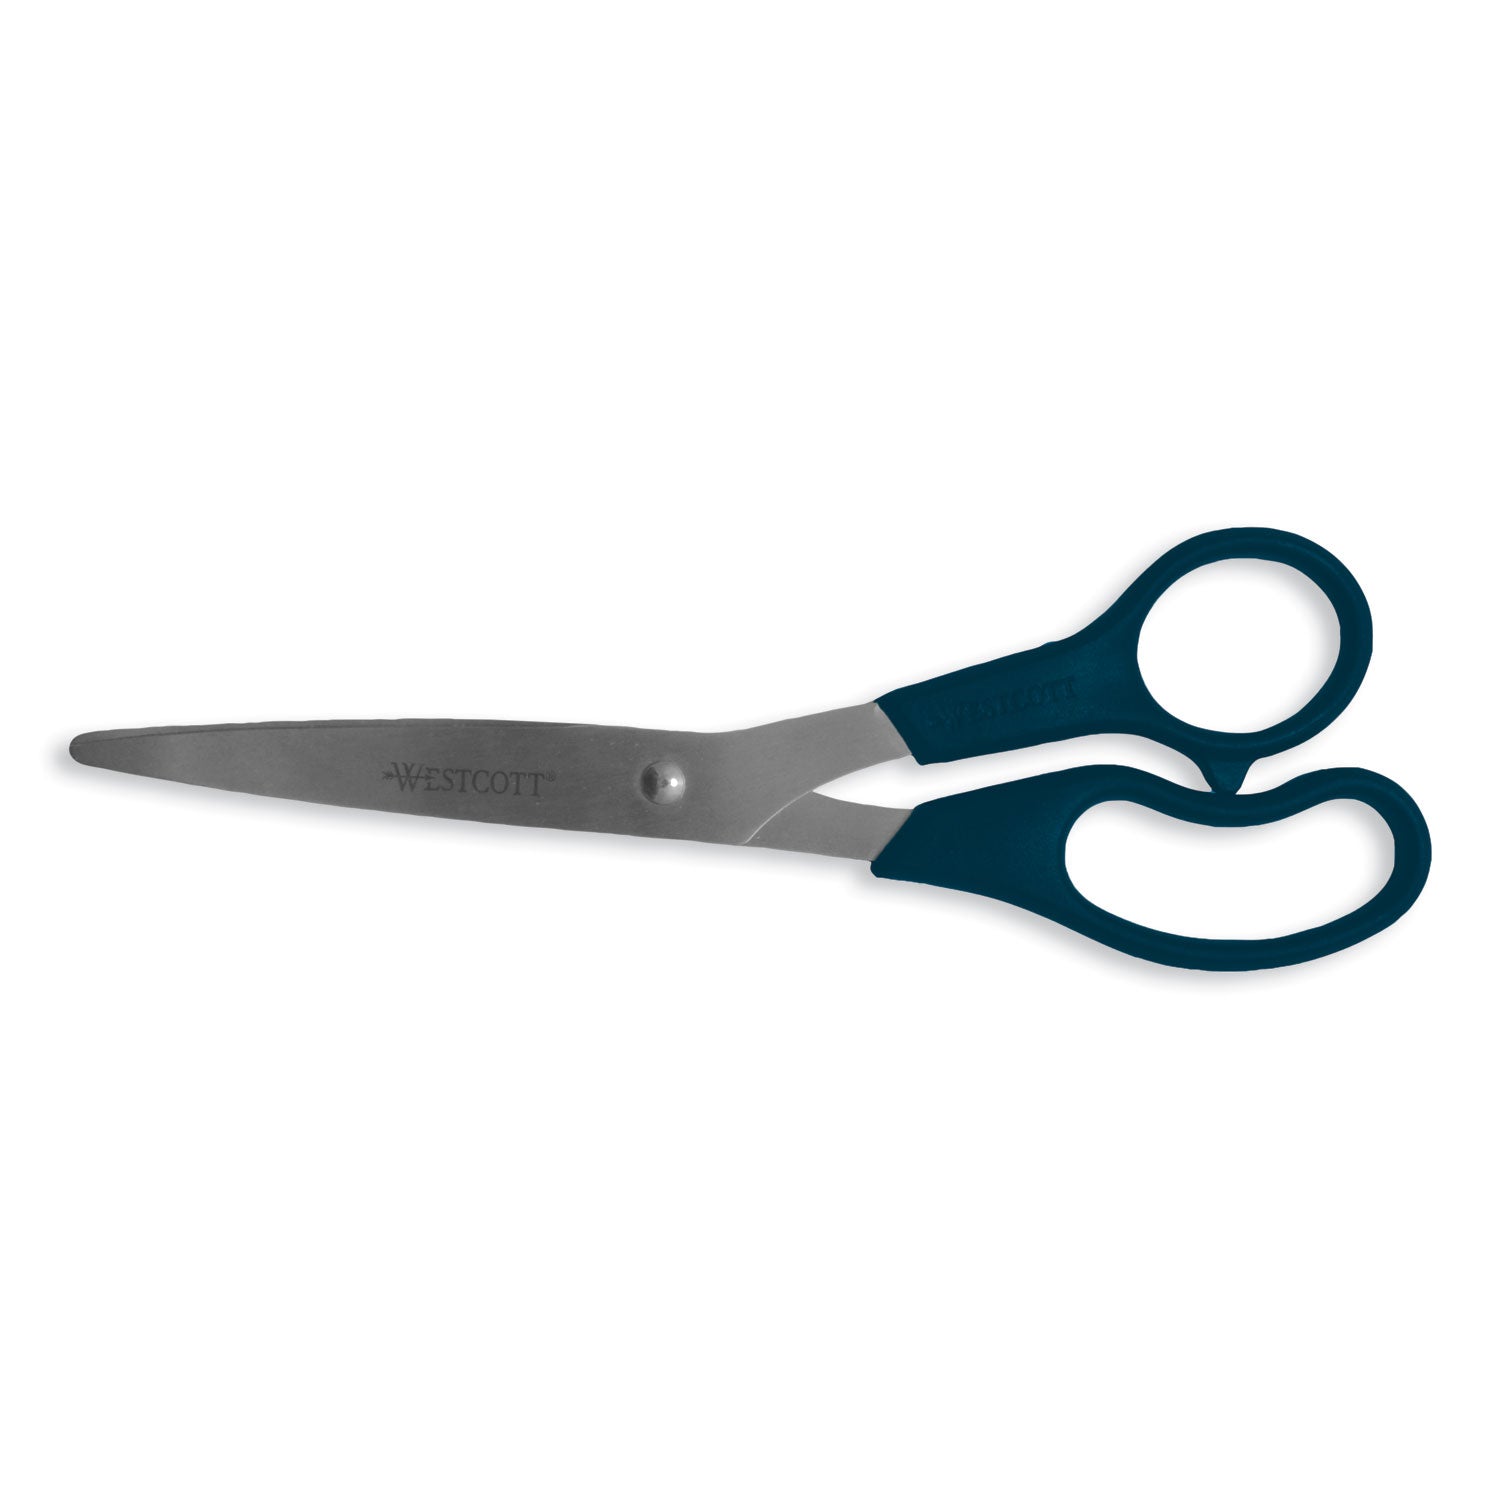 Value Line Stainless Steel Shears, 8" Long, 3.5" Cut Length, Black Straight Handle - 